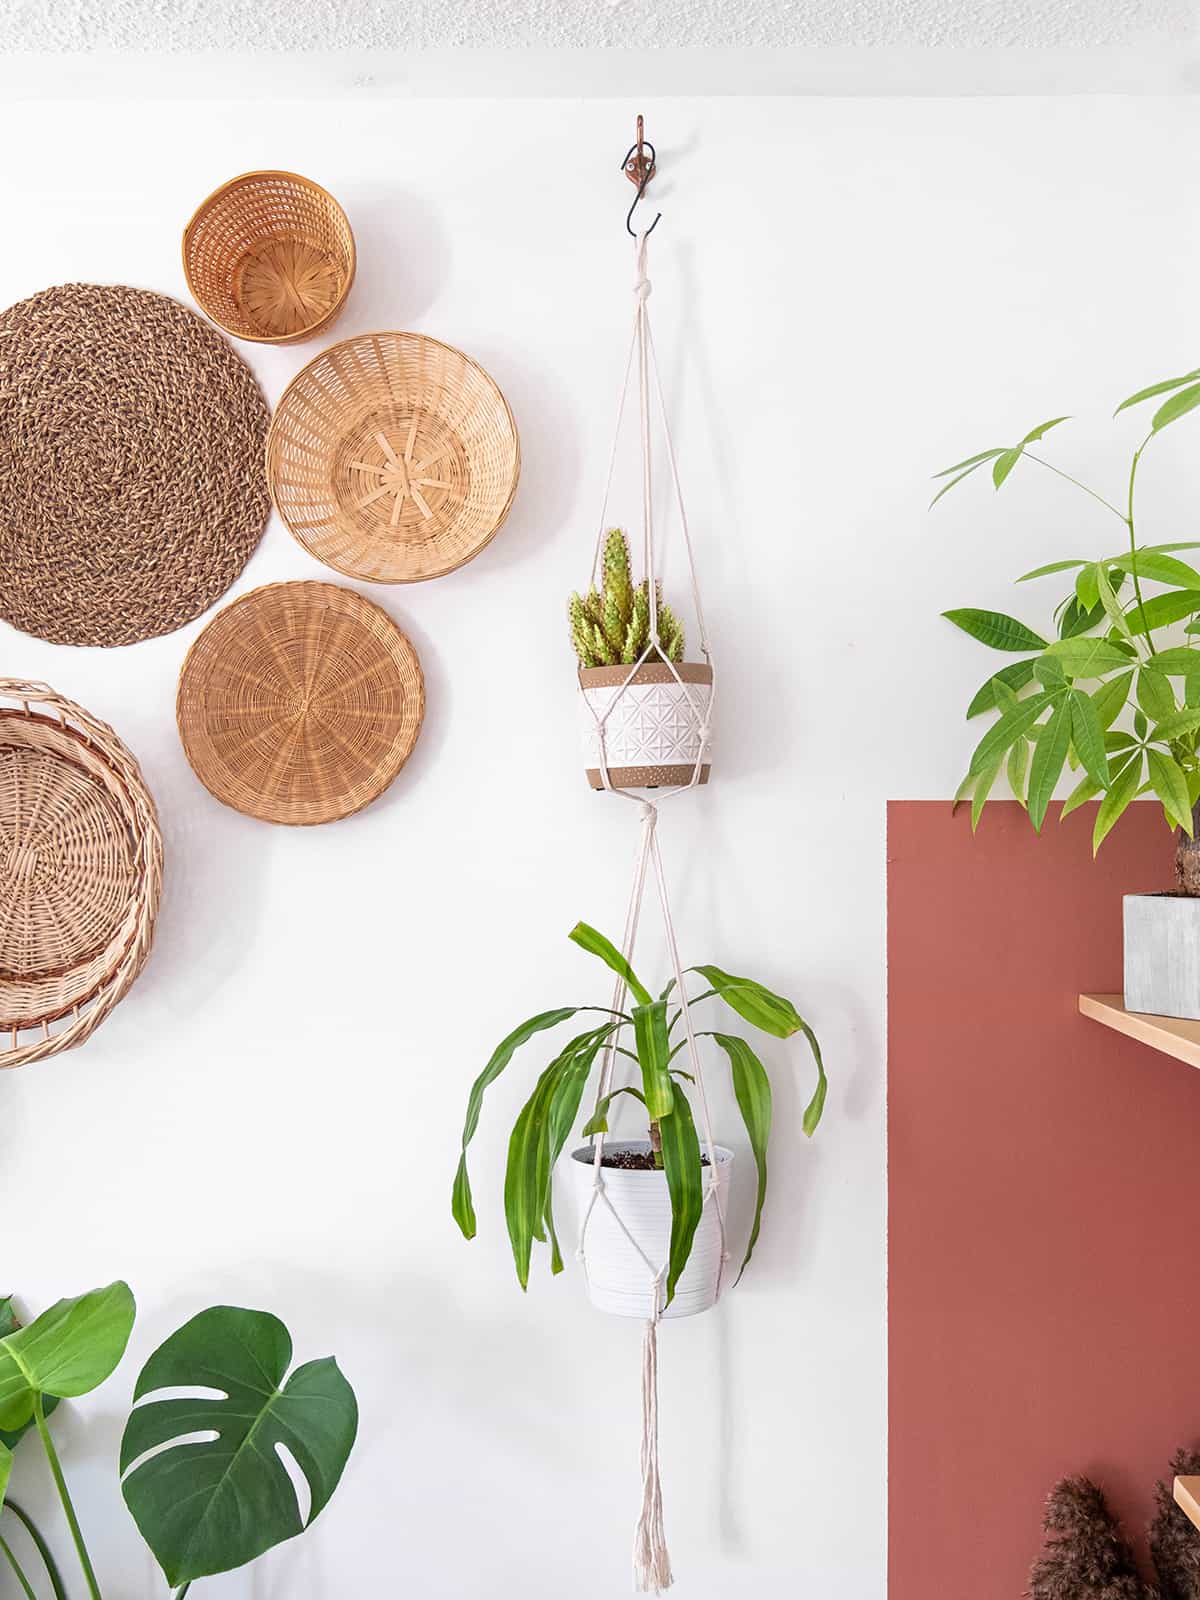 Go Rustic with Hanging Plates and Planters